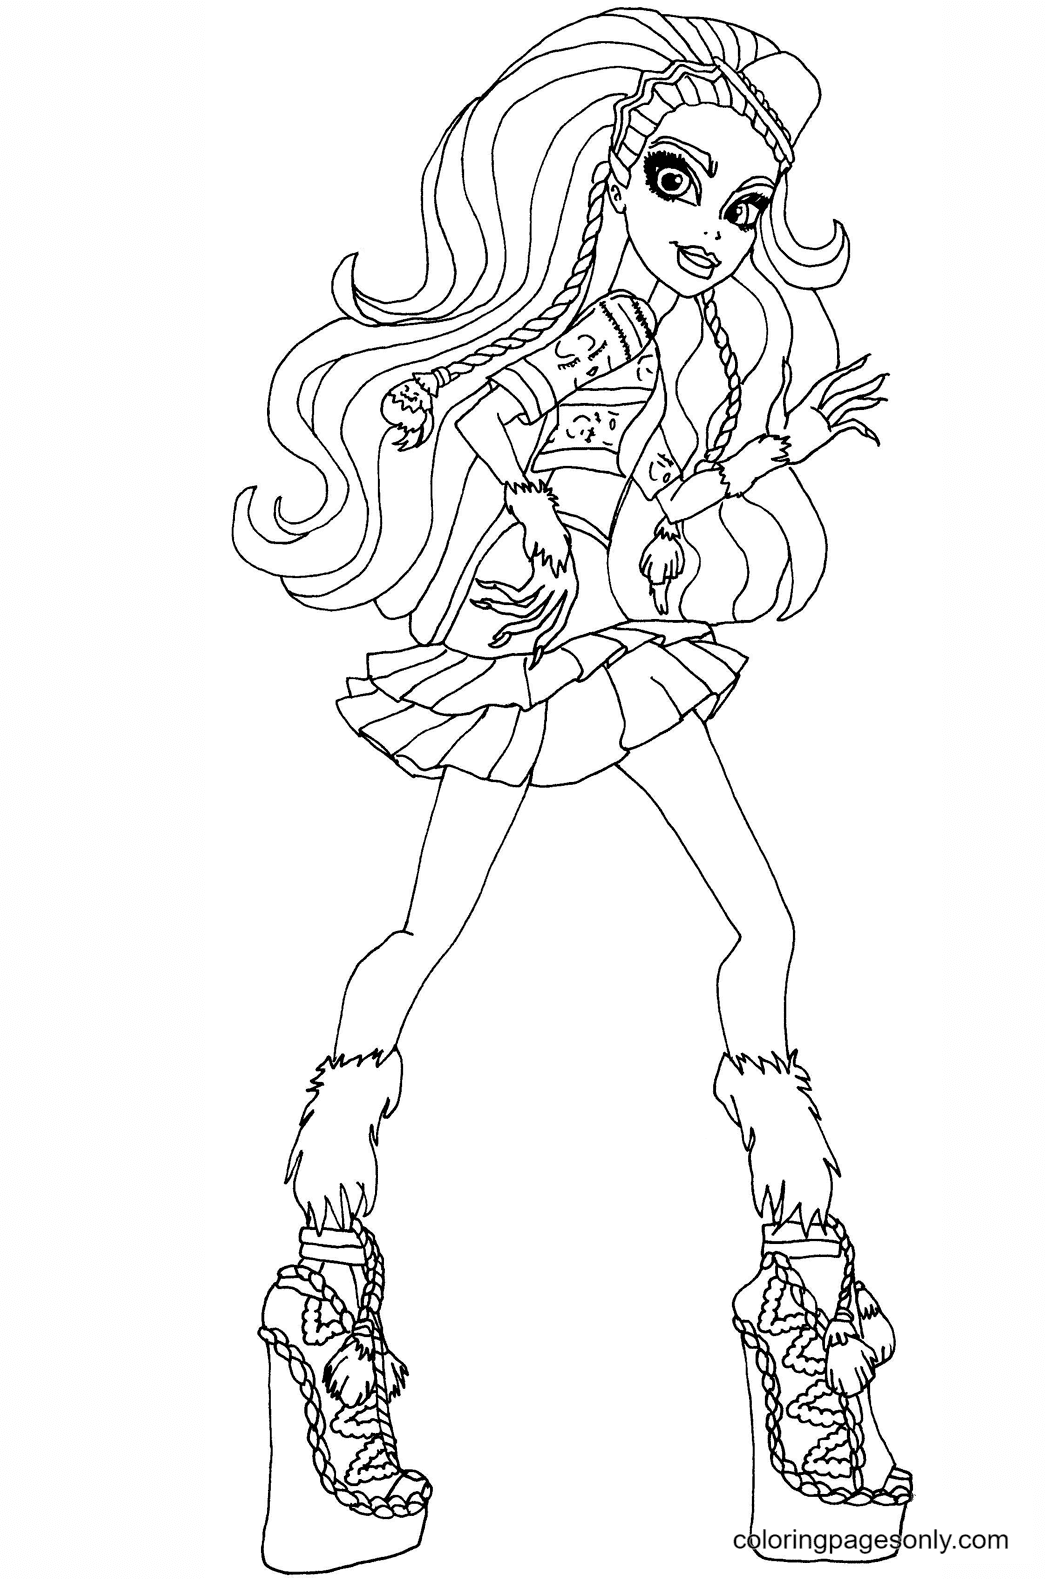 Marisol Coxi Coloring Page